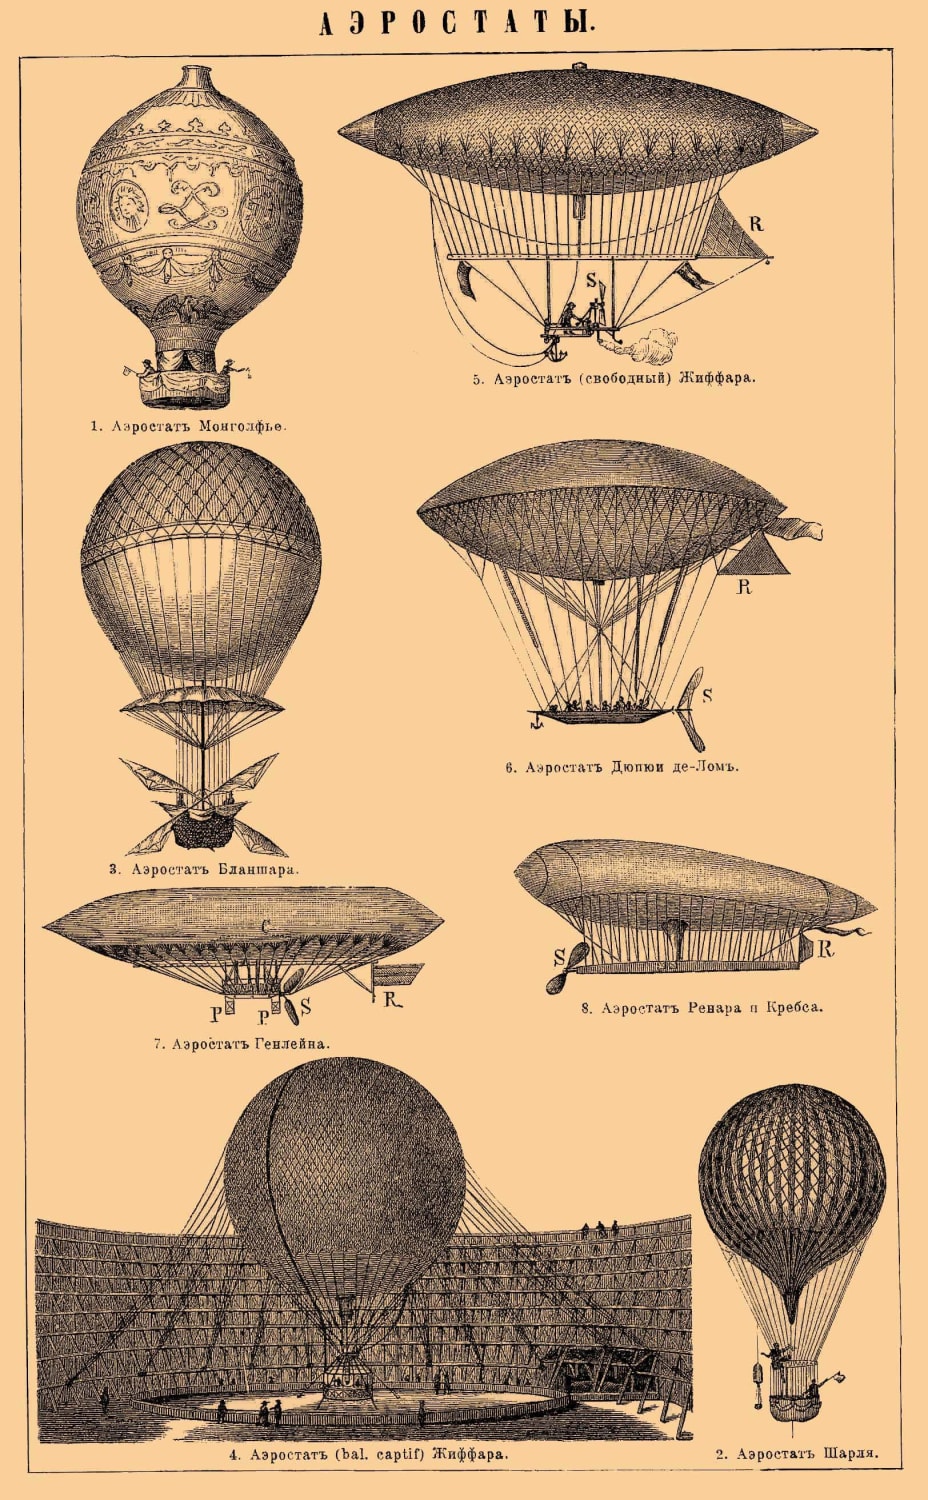 Contemporary Airship designs from The Brockhaus and Efron Encyclopaedic Dictionary (1890-1907).